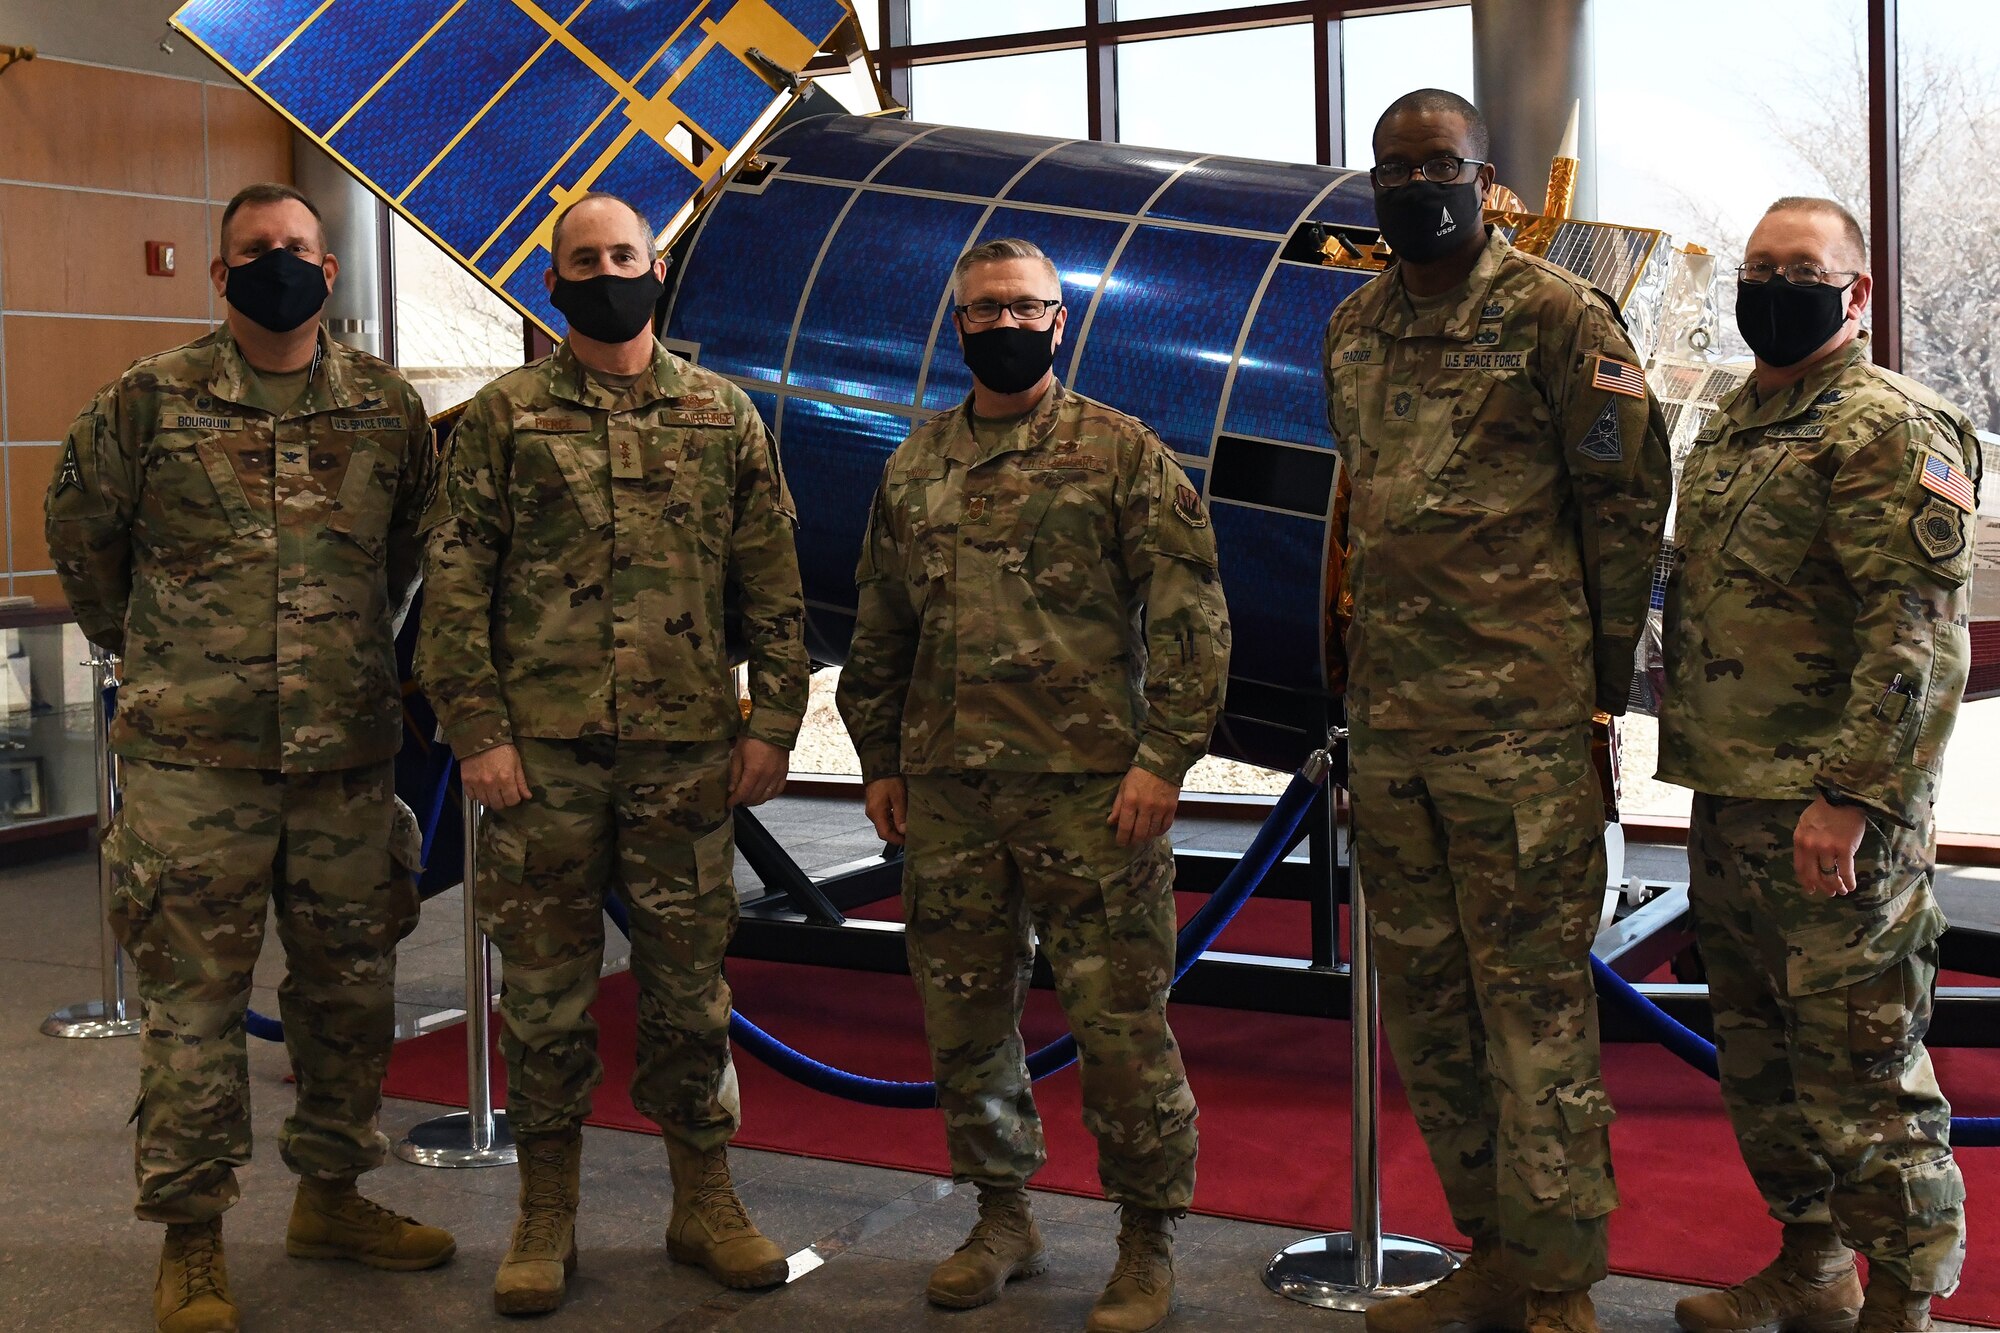 On March 11, the U.S. Air Force named First Air Force as the air component to U.S. Space Command (USSPACECOM). Last week, starting with two visits to bases in Colorado, the 1AF team became actively engaged in learning more about the potential of its new role and expanded responsibilities.